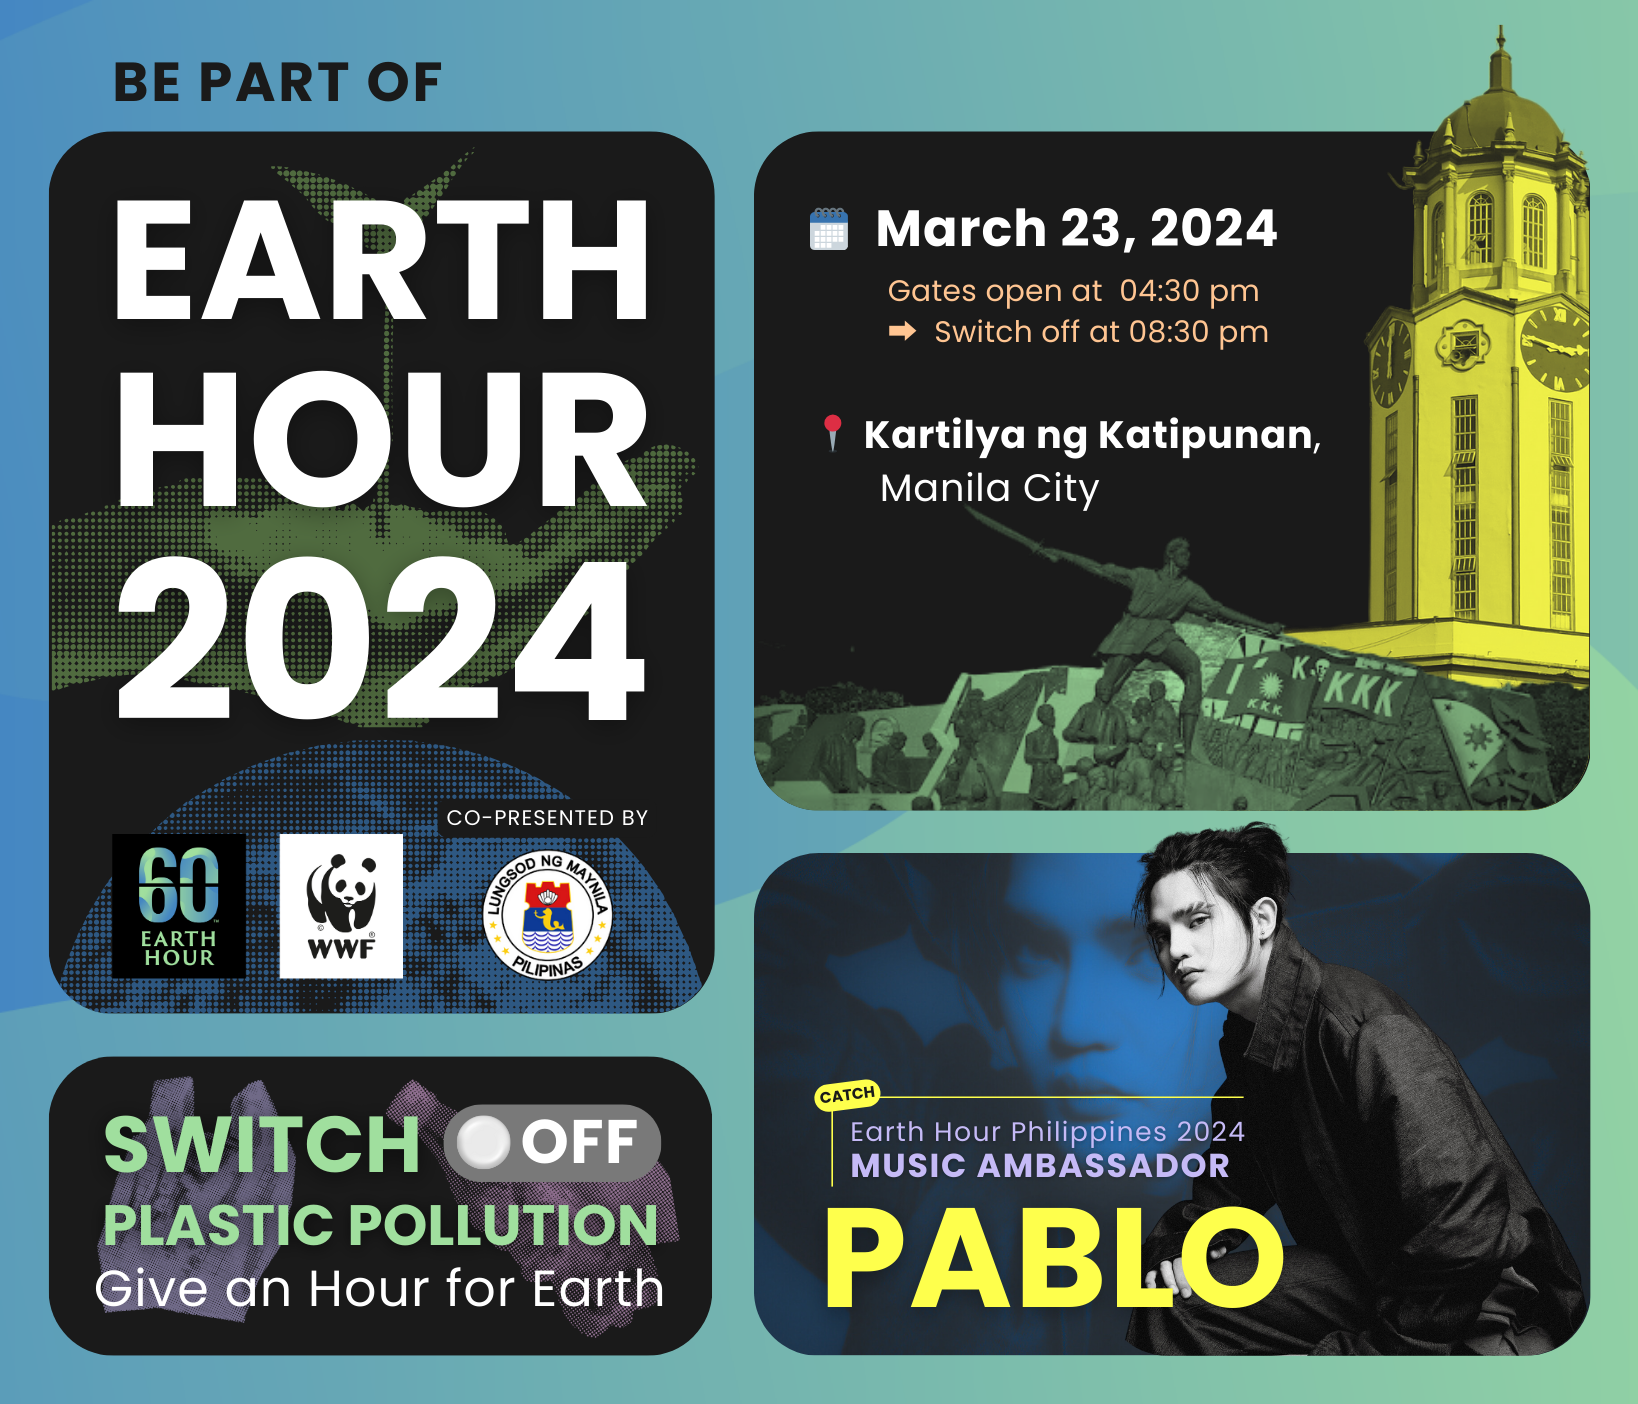 SB19’s Pablo tapped as WWFPH Earth Hour Music Ambassador